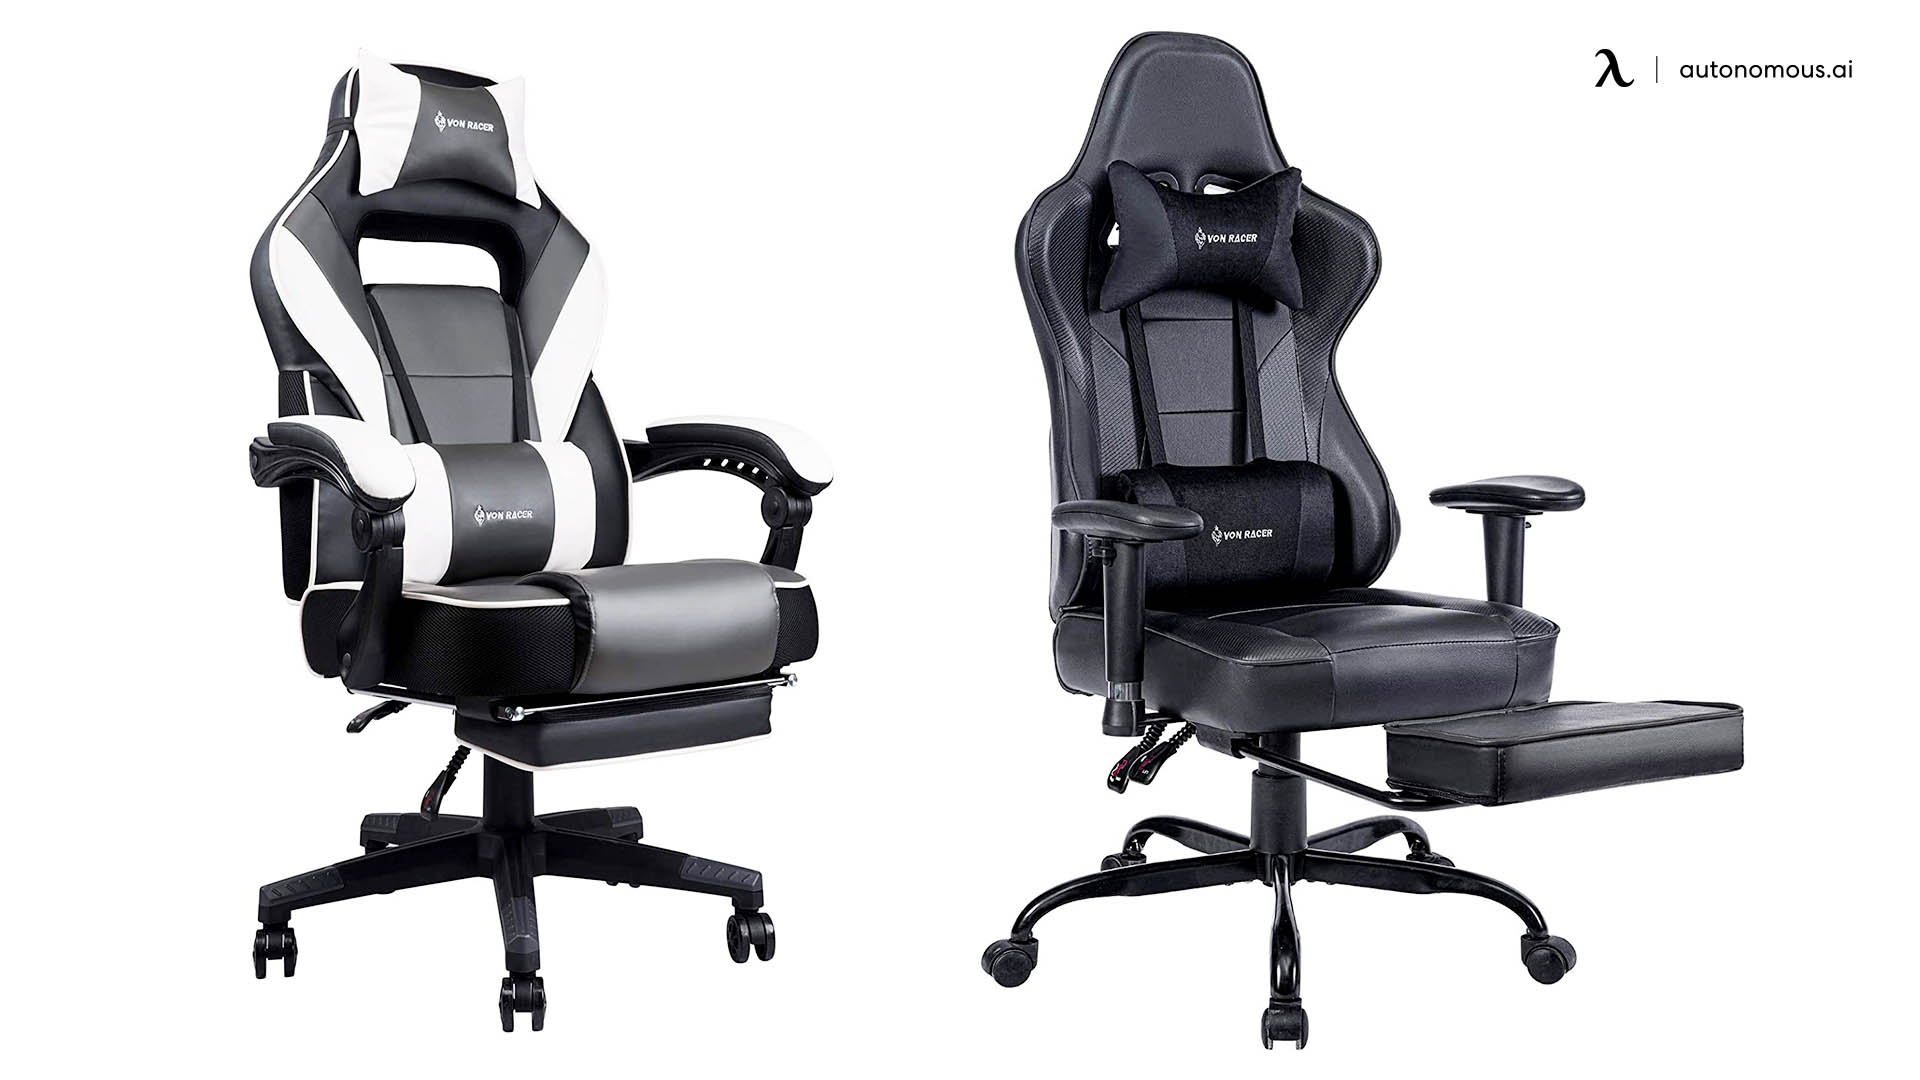 https://cdn.autonomous.ai/static/upload/images/common/upload/20210422/The-Best-Office-Chair-with-Leg-Rest-features-10-Editors-Choices-for-2021_45ad09ecbda.jpg